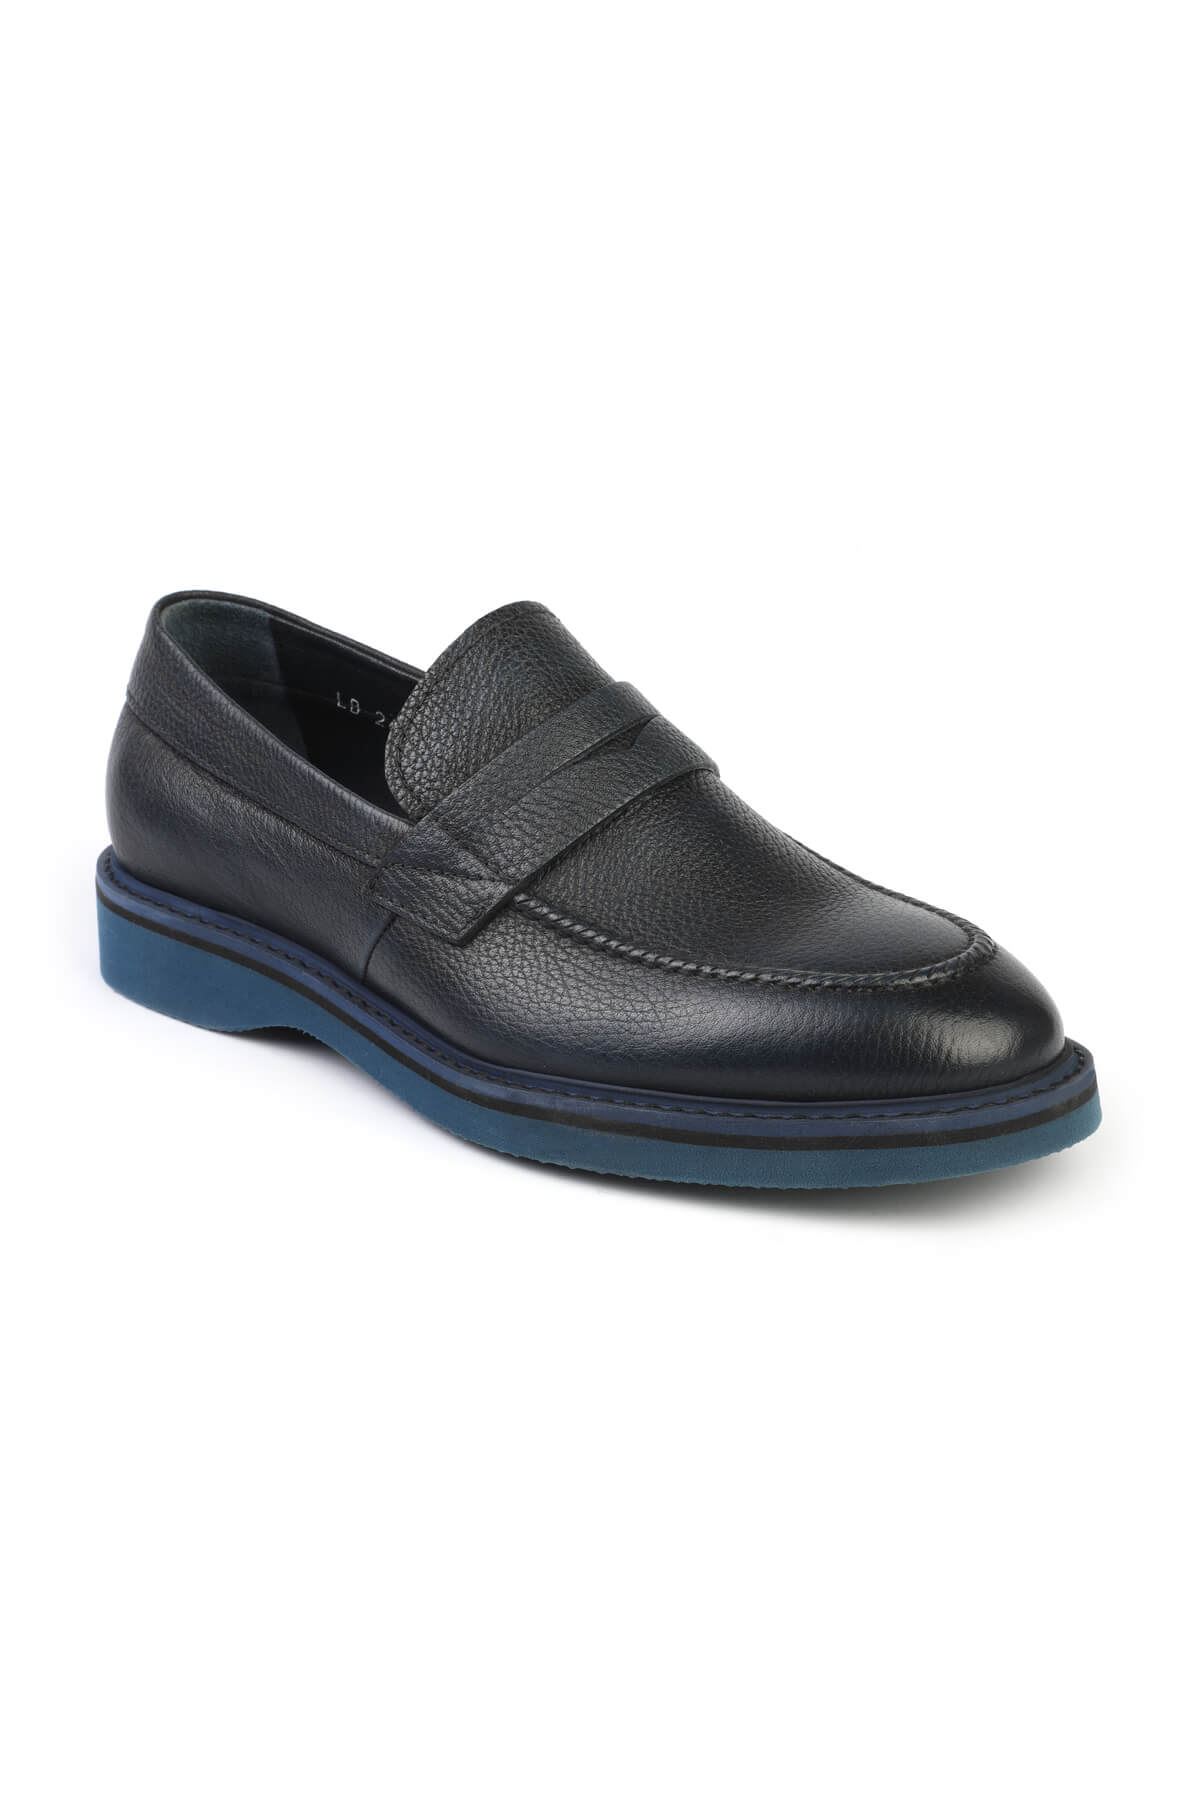 Libero 2695 Navy Blue Loafer Shoes